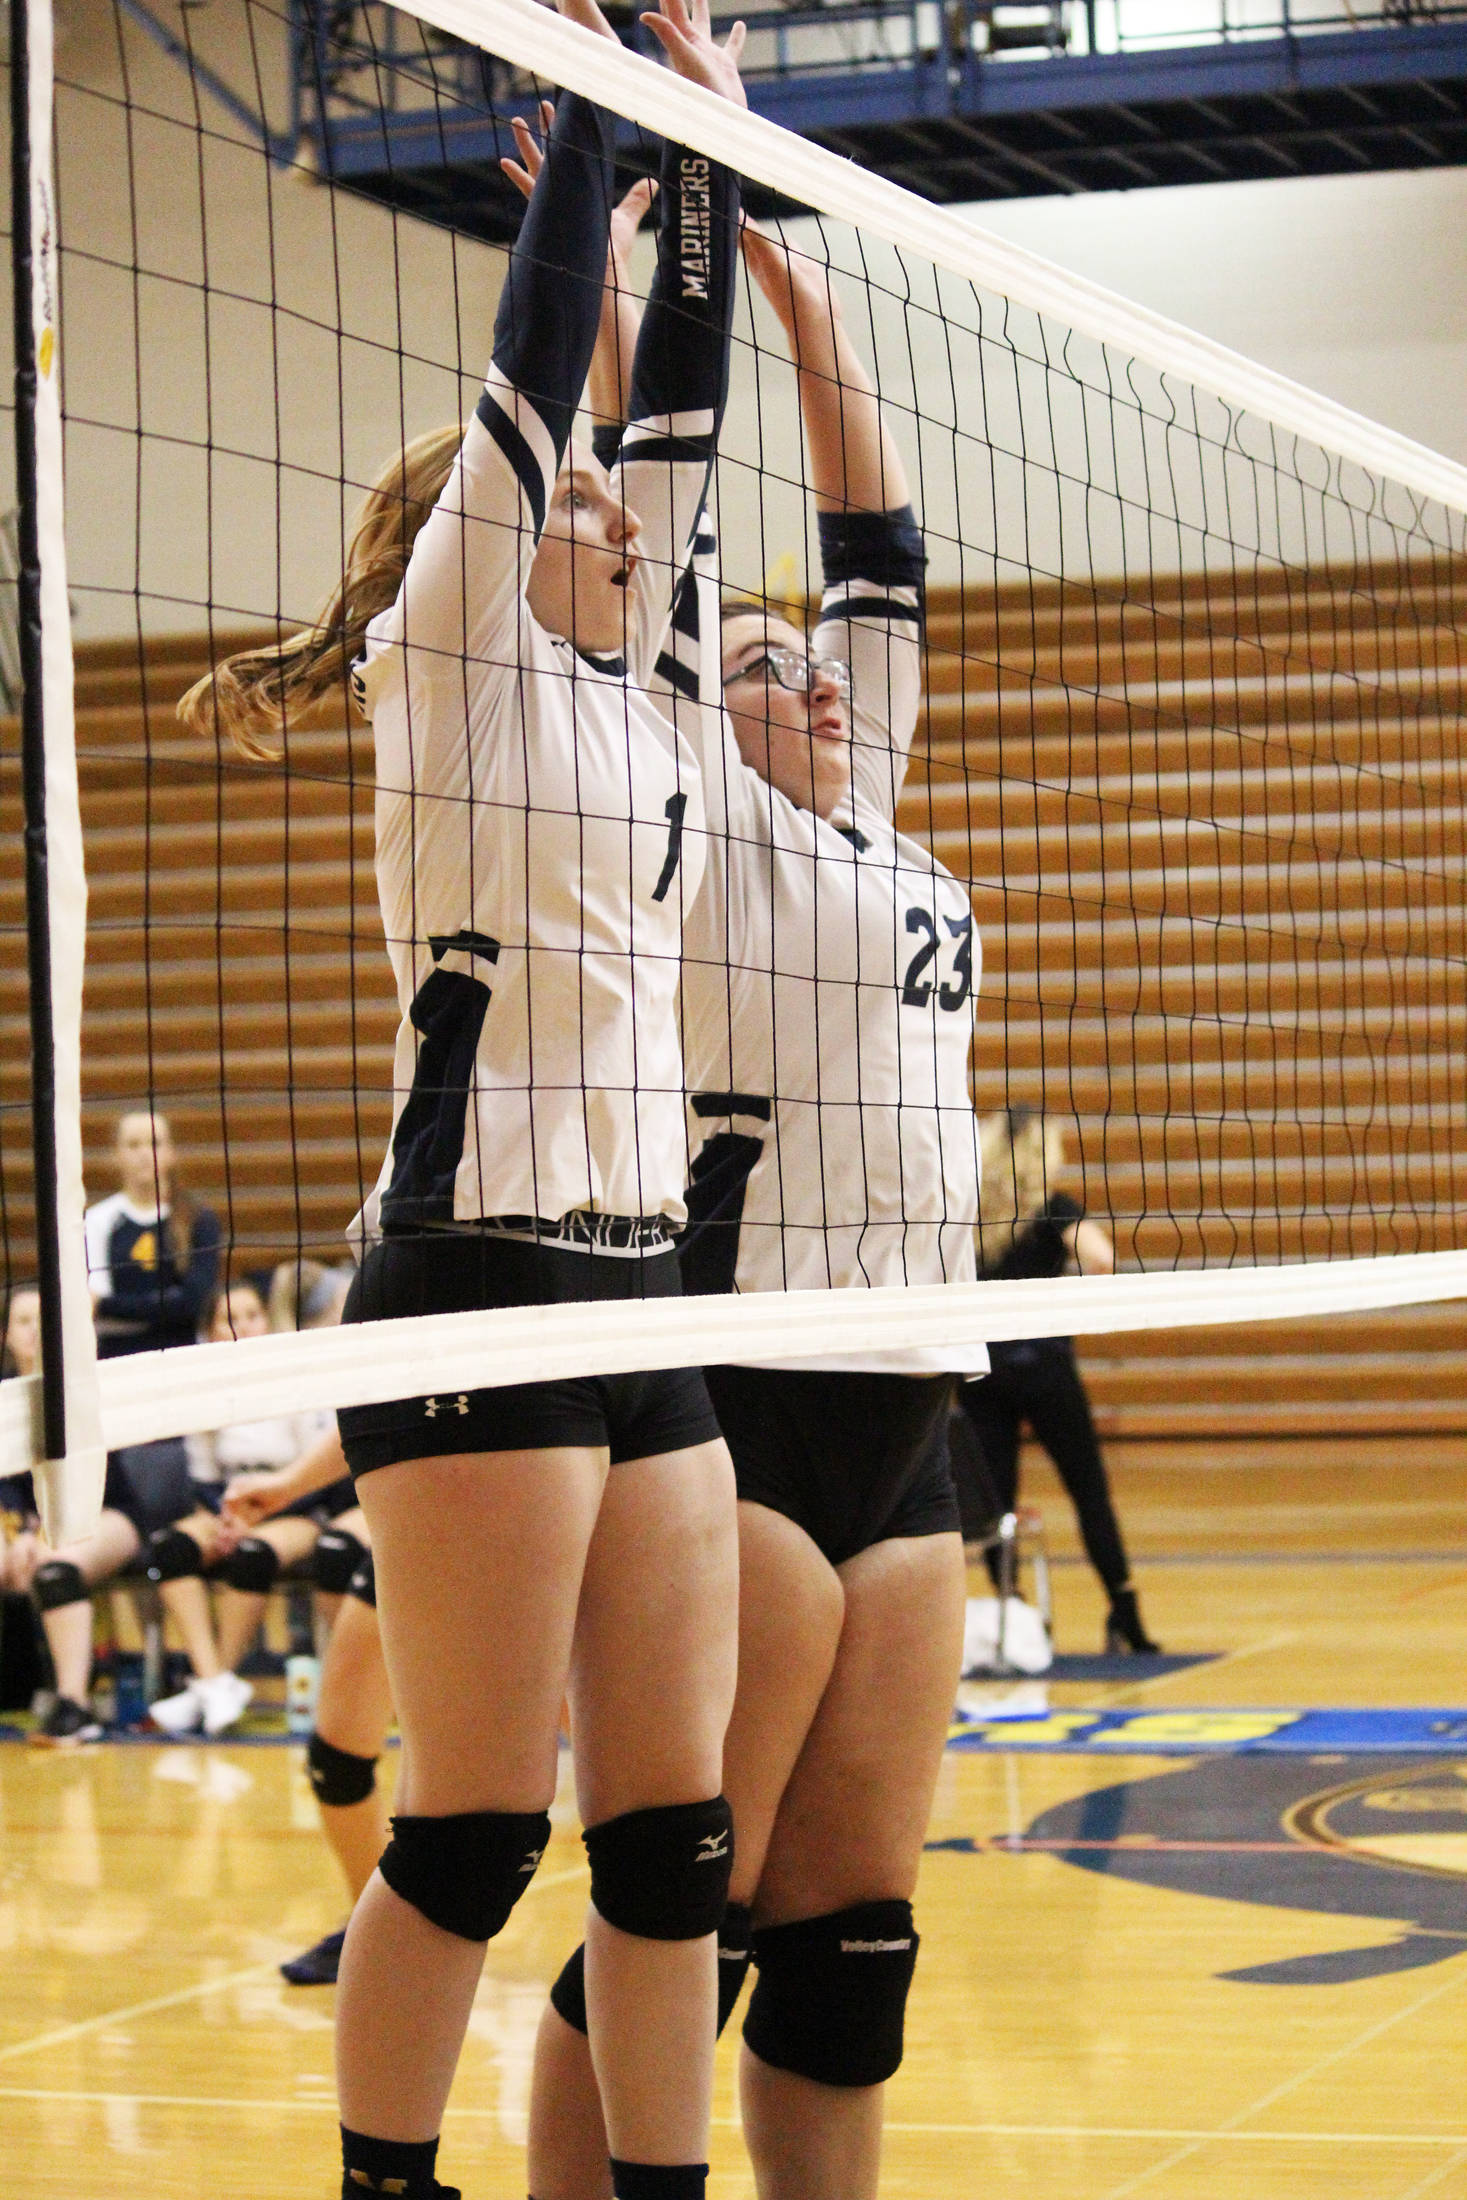 Homer’s Kelli Bishop (left) and Tonda Smude (right) jump to block a shot from the Nikiski Bulldogs during a Saturday, Aug. 24, 2019 volleyball game during the Homer Jamboree tournament in the Alice Witt Gymnasium in Homer, Alaska. (Photo by Megan Pacer/Homer News)